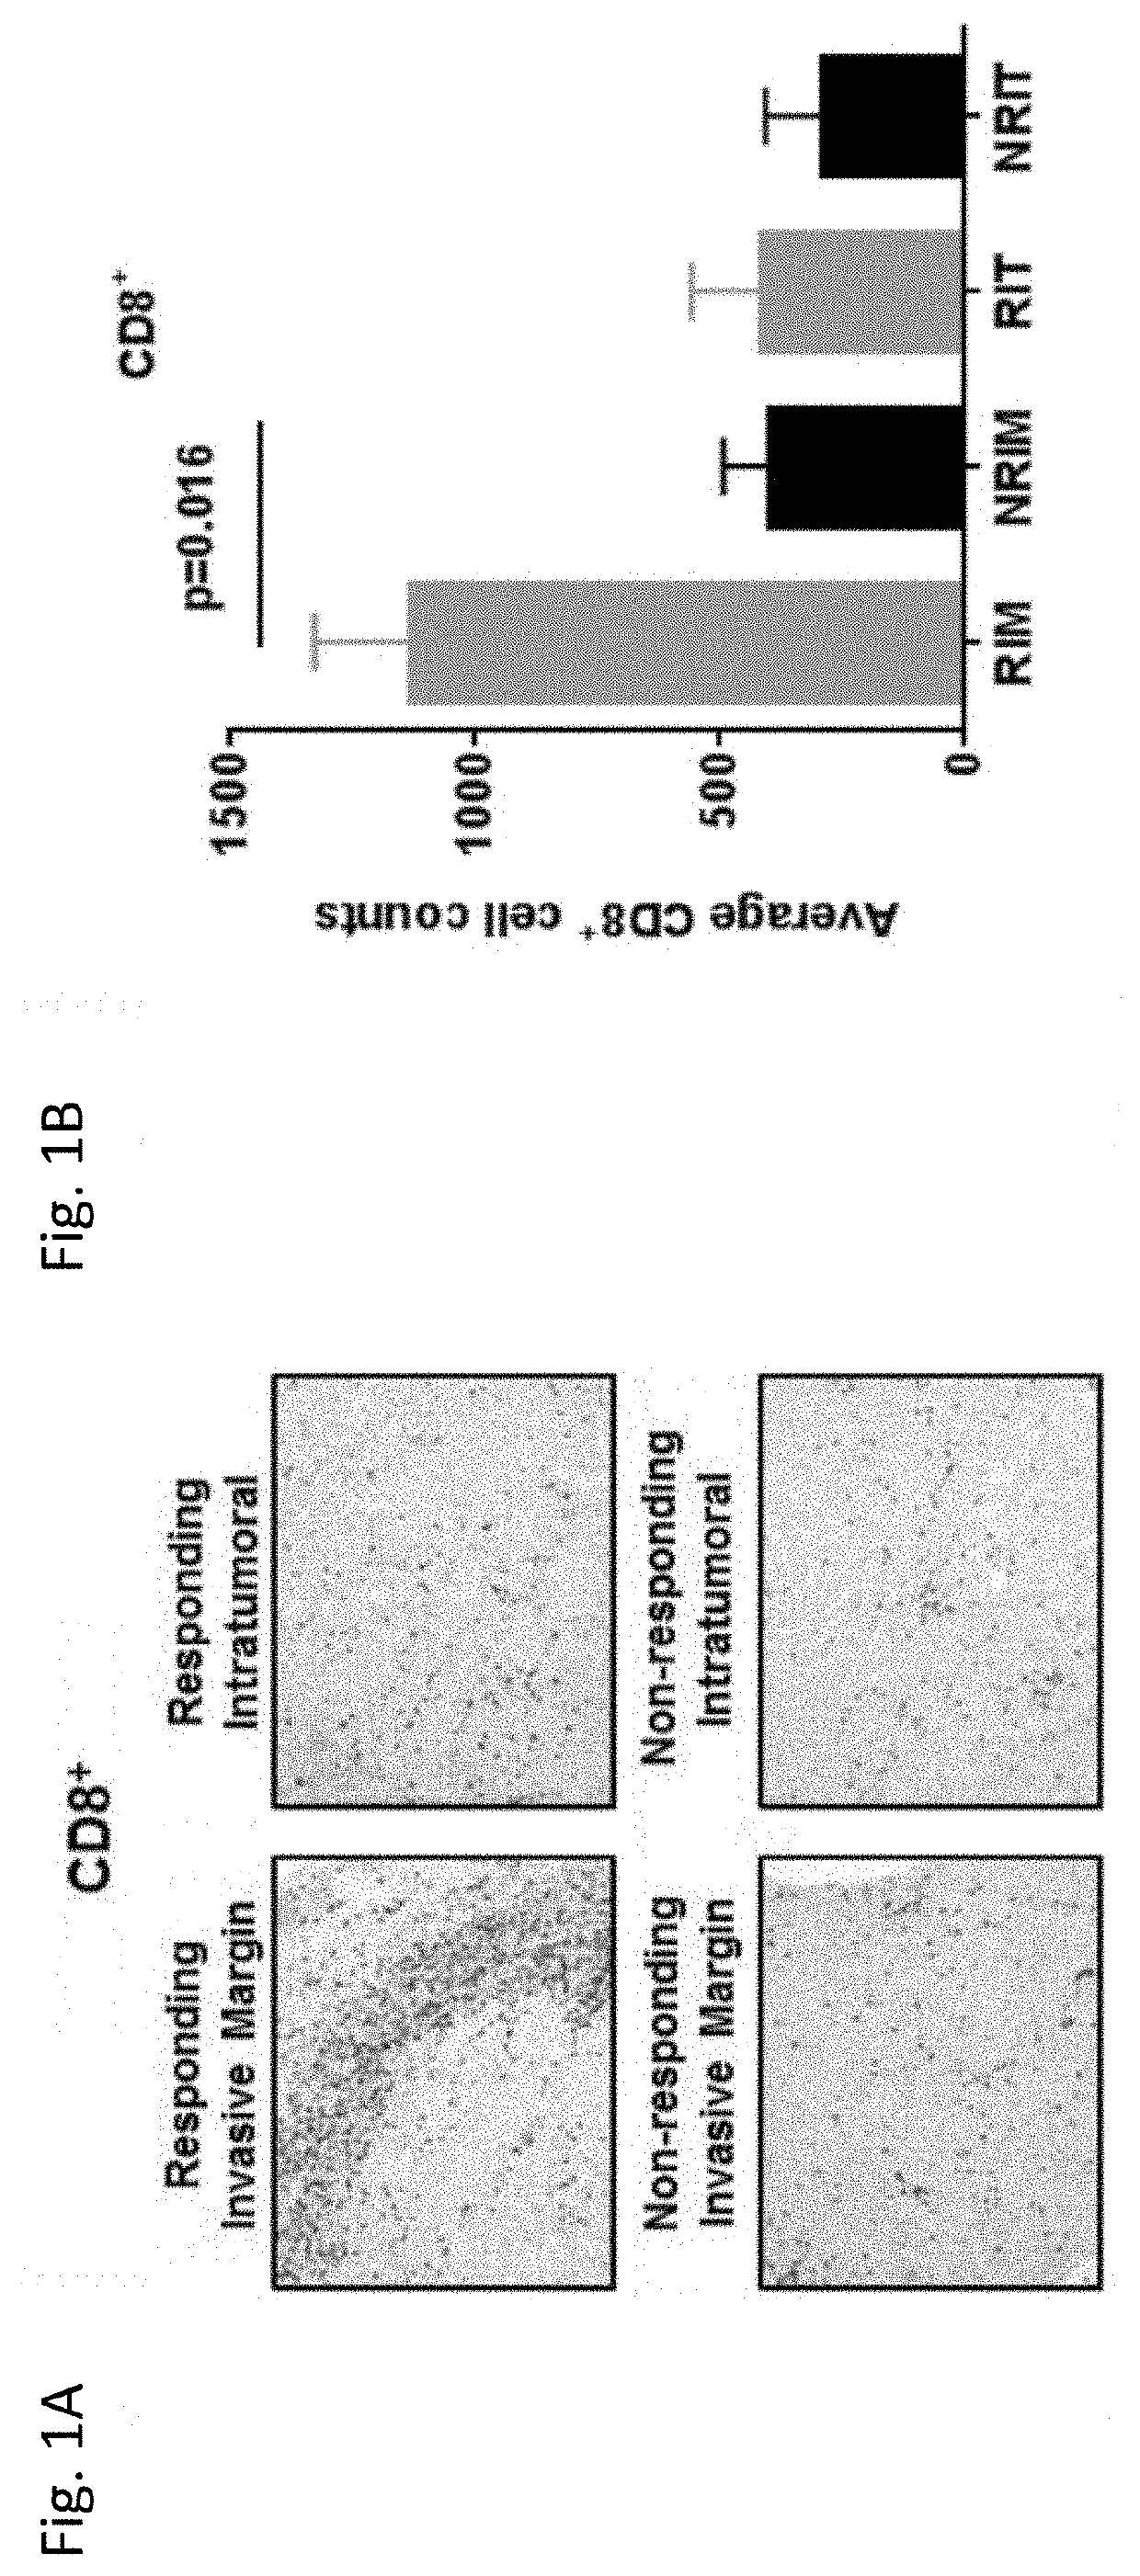 Methods for predicting responsiveness of a cancer to an immunotherapeutic agent and methods of treating cancer